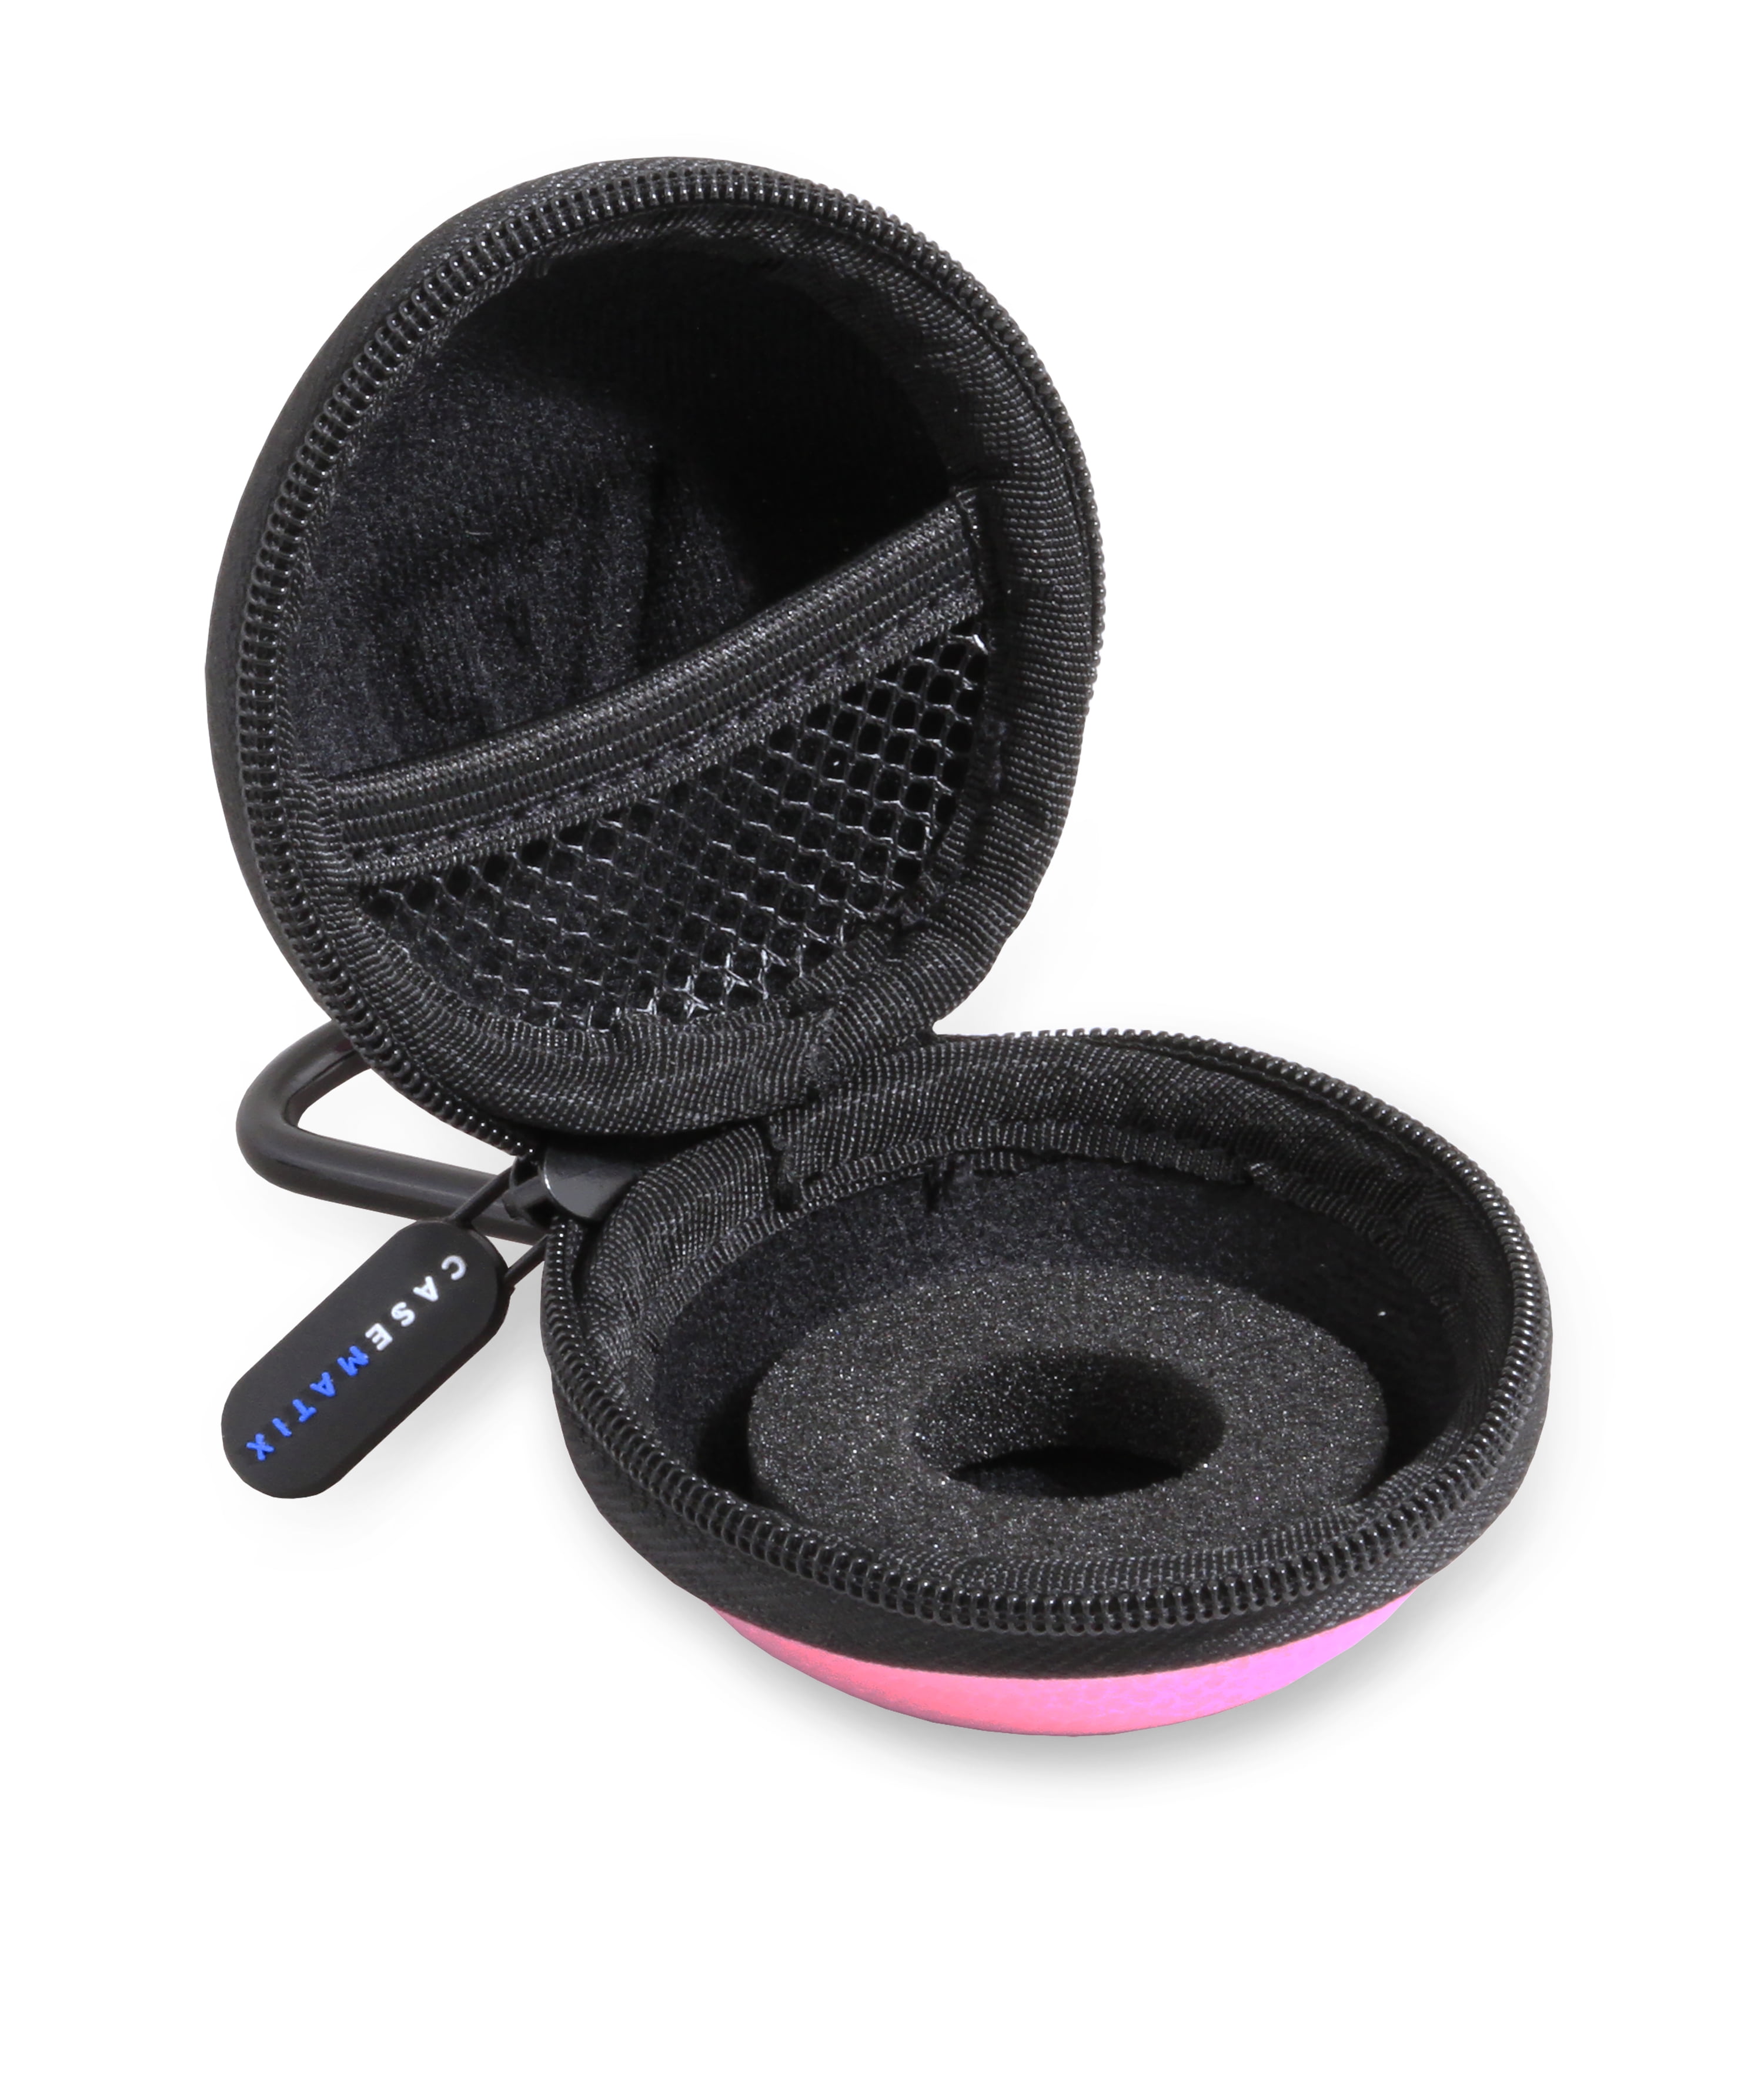 Pink Sphero Mini Case fits Sphero Mini App-Enabled Robot Ball with Accessories 